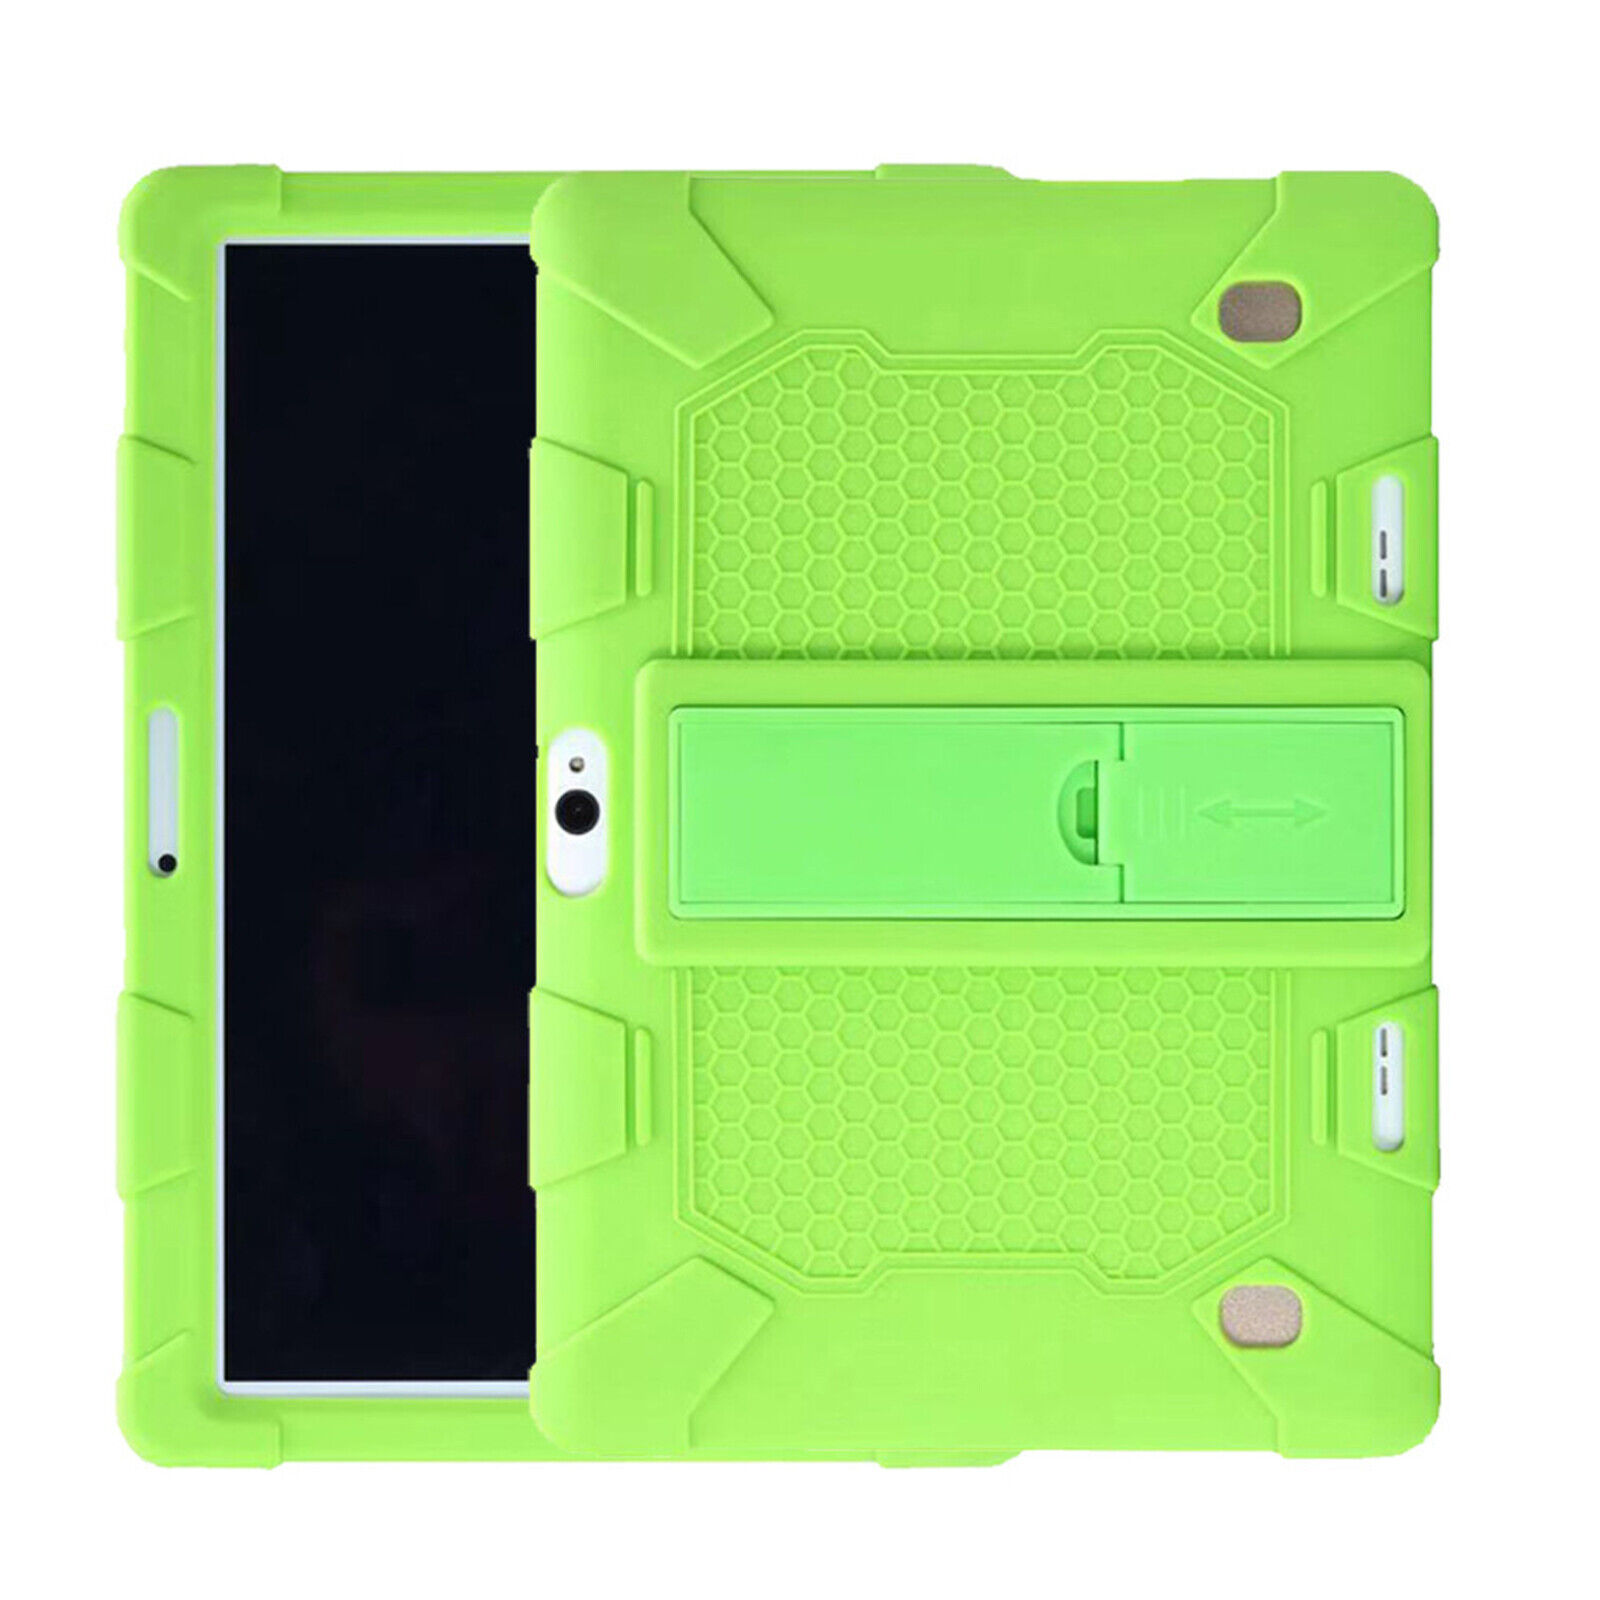 10" Inch Universal Green Tablet Case Android Tablet PC Shockproof Silicone Stand Case Covers